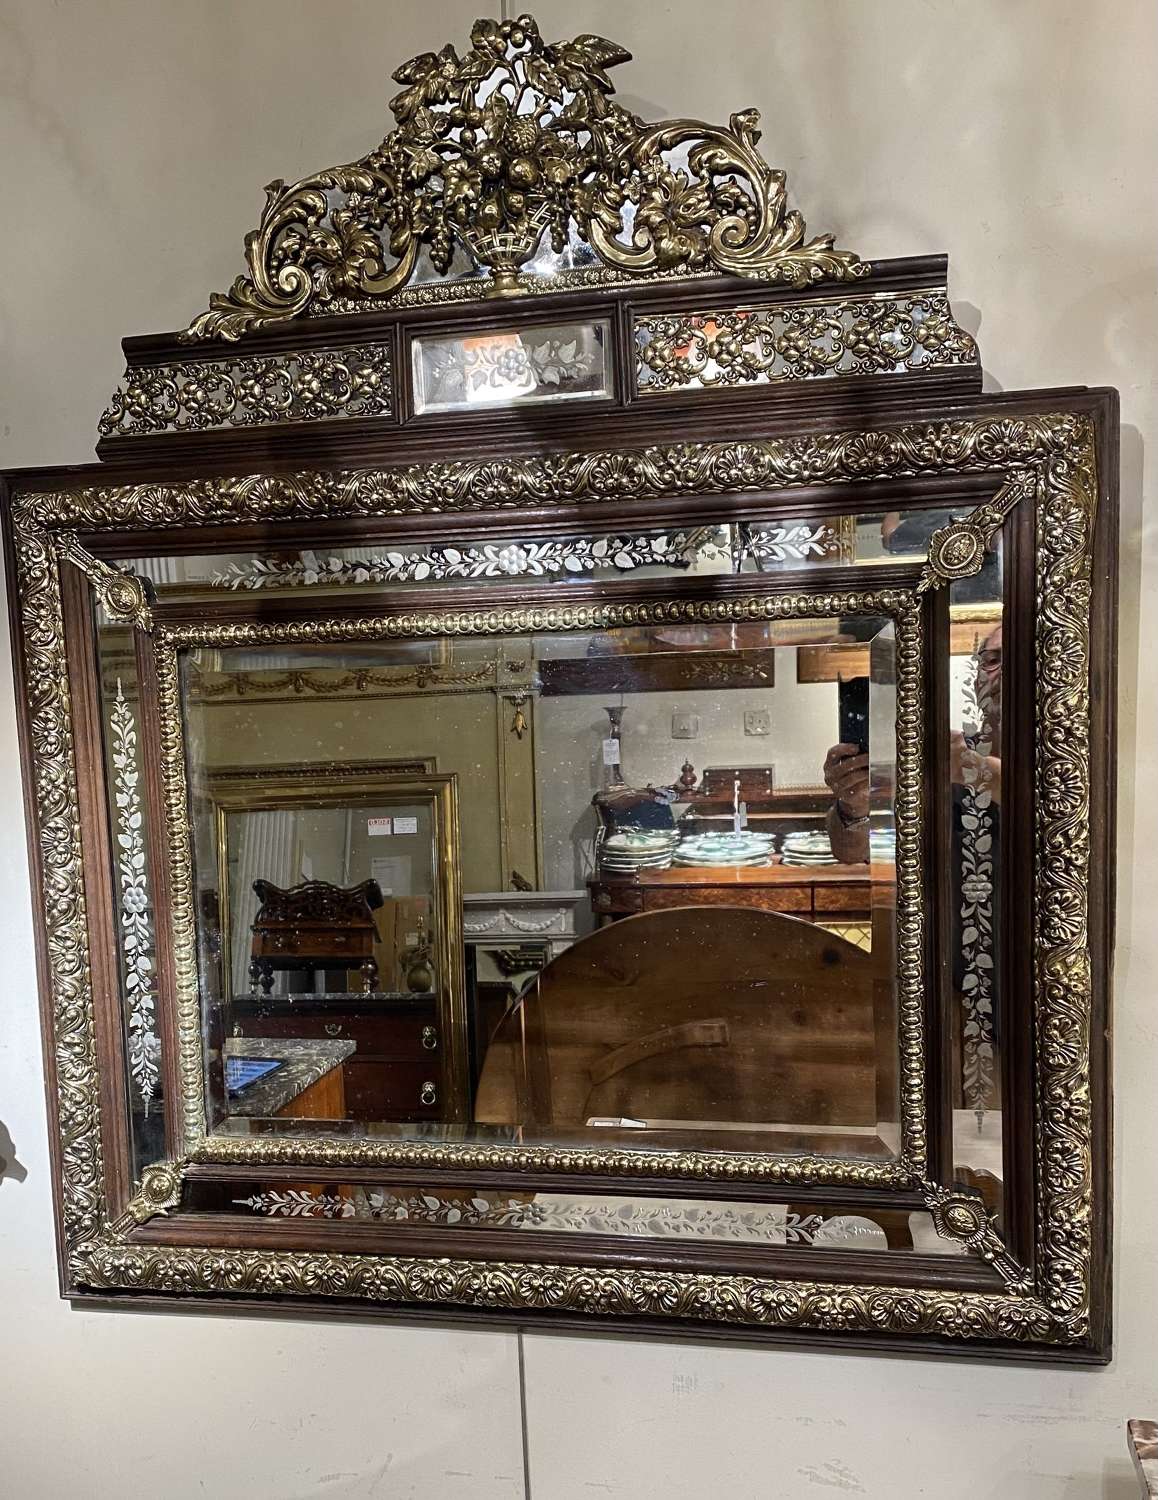 Decorative engraved repousee mirror